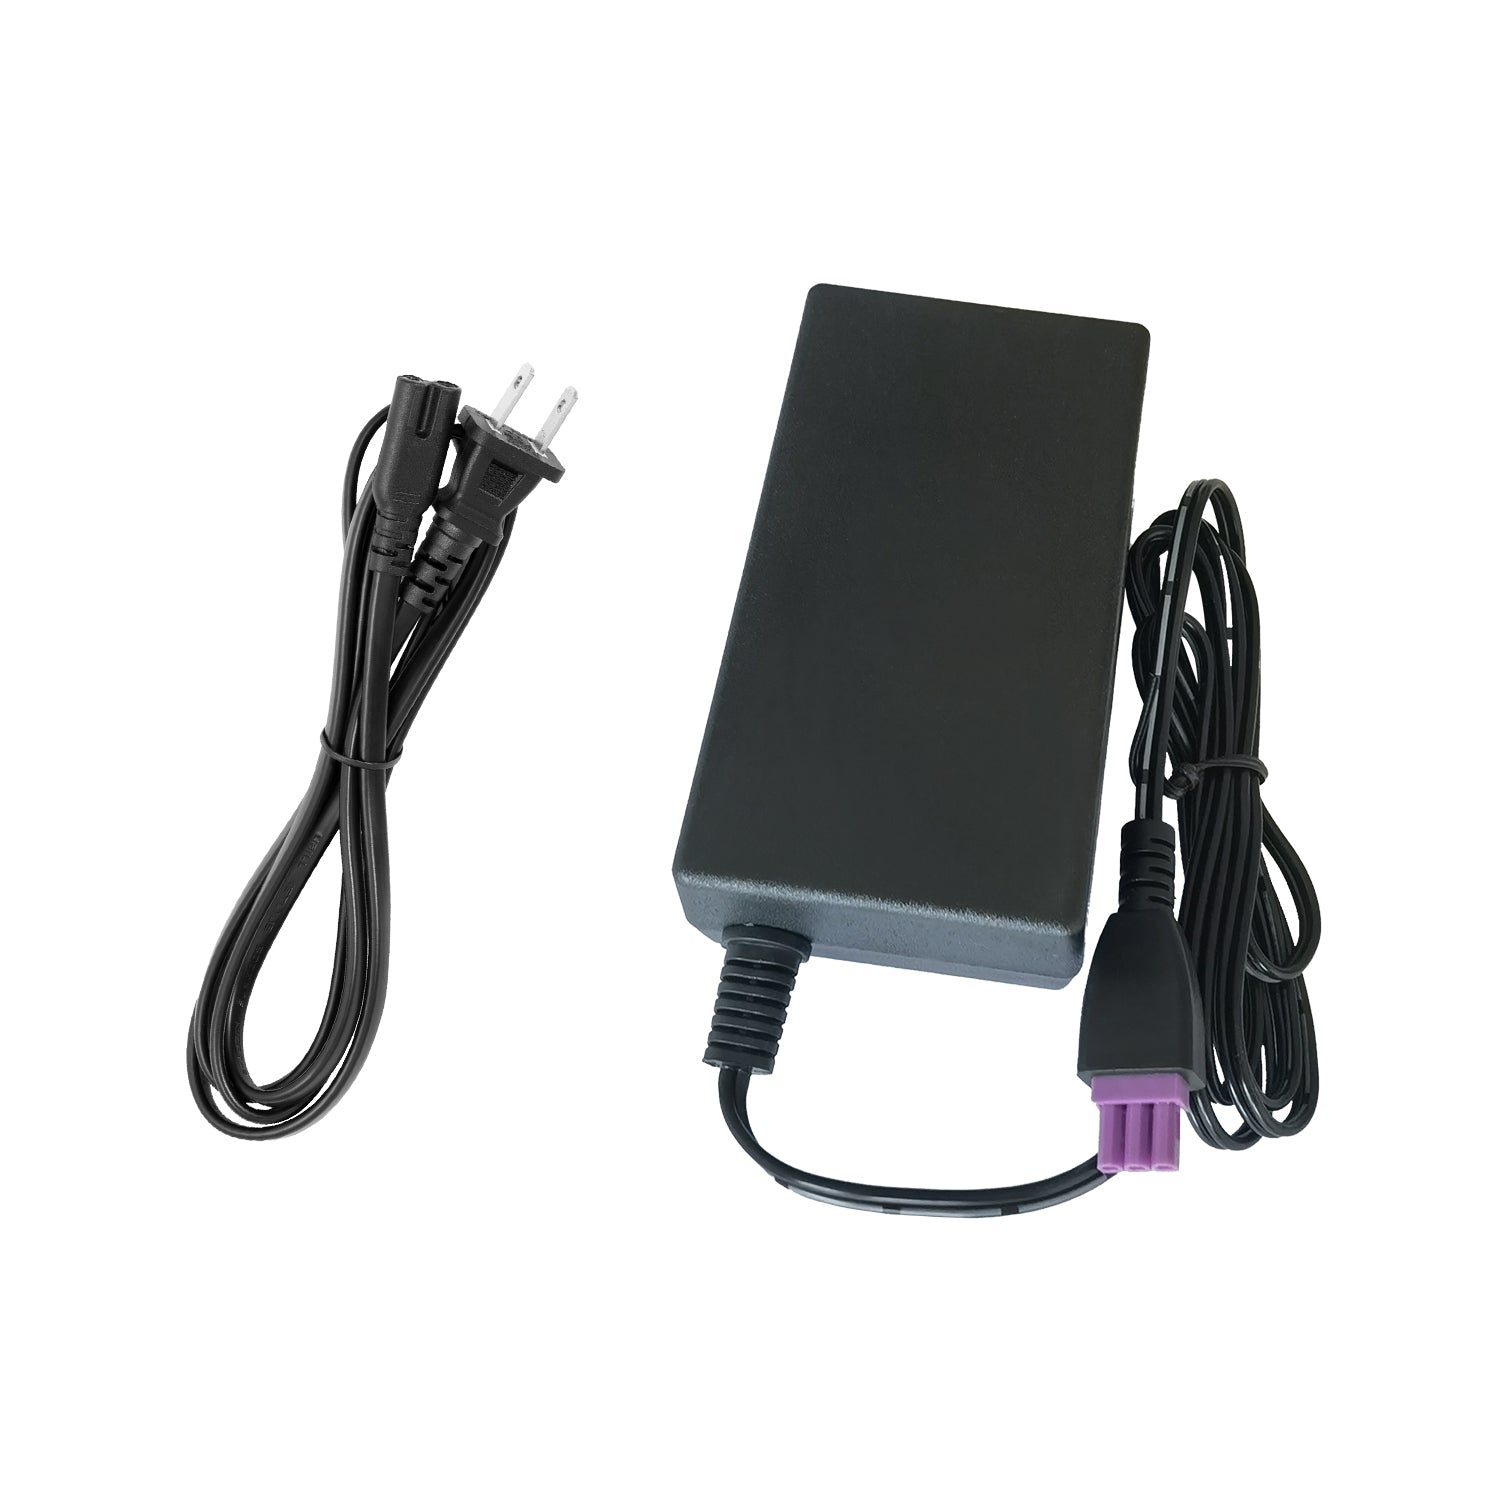 Power Adapter for HP Printer 0950-4476.